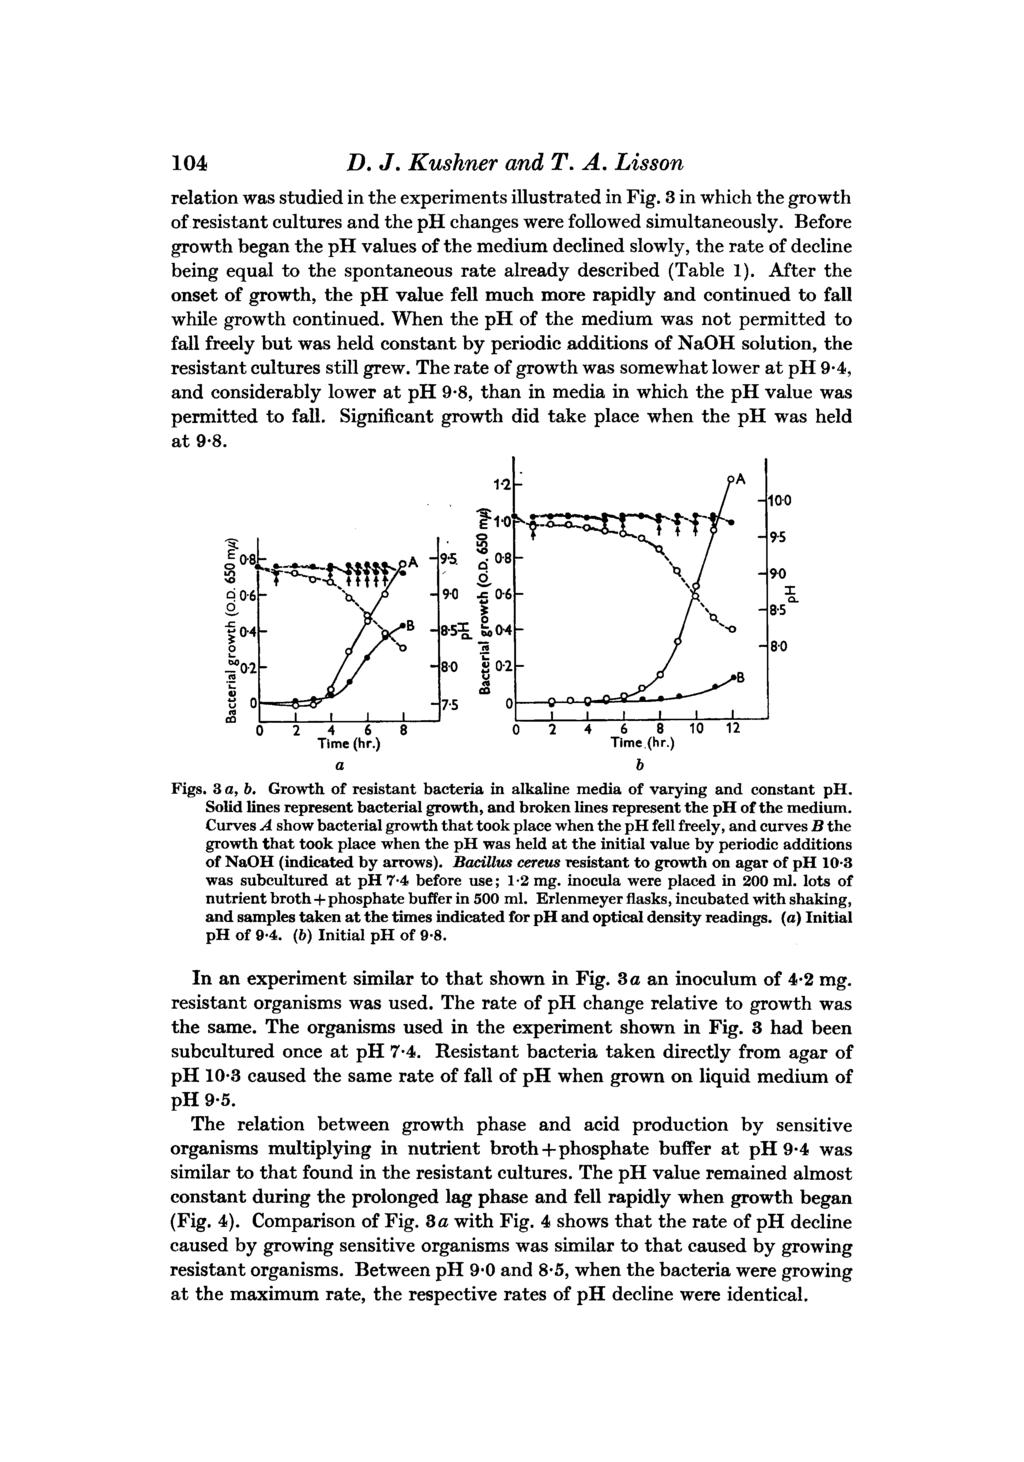 104 D. J. Kushner and T. A. Lisson relation was studied in the experiments illustrated in Fig. 3 in which the growth of resistant cultures and the ph changes were followed simultaneously.